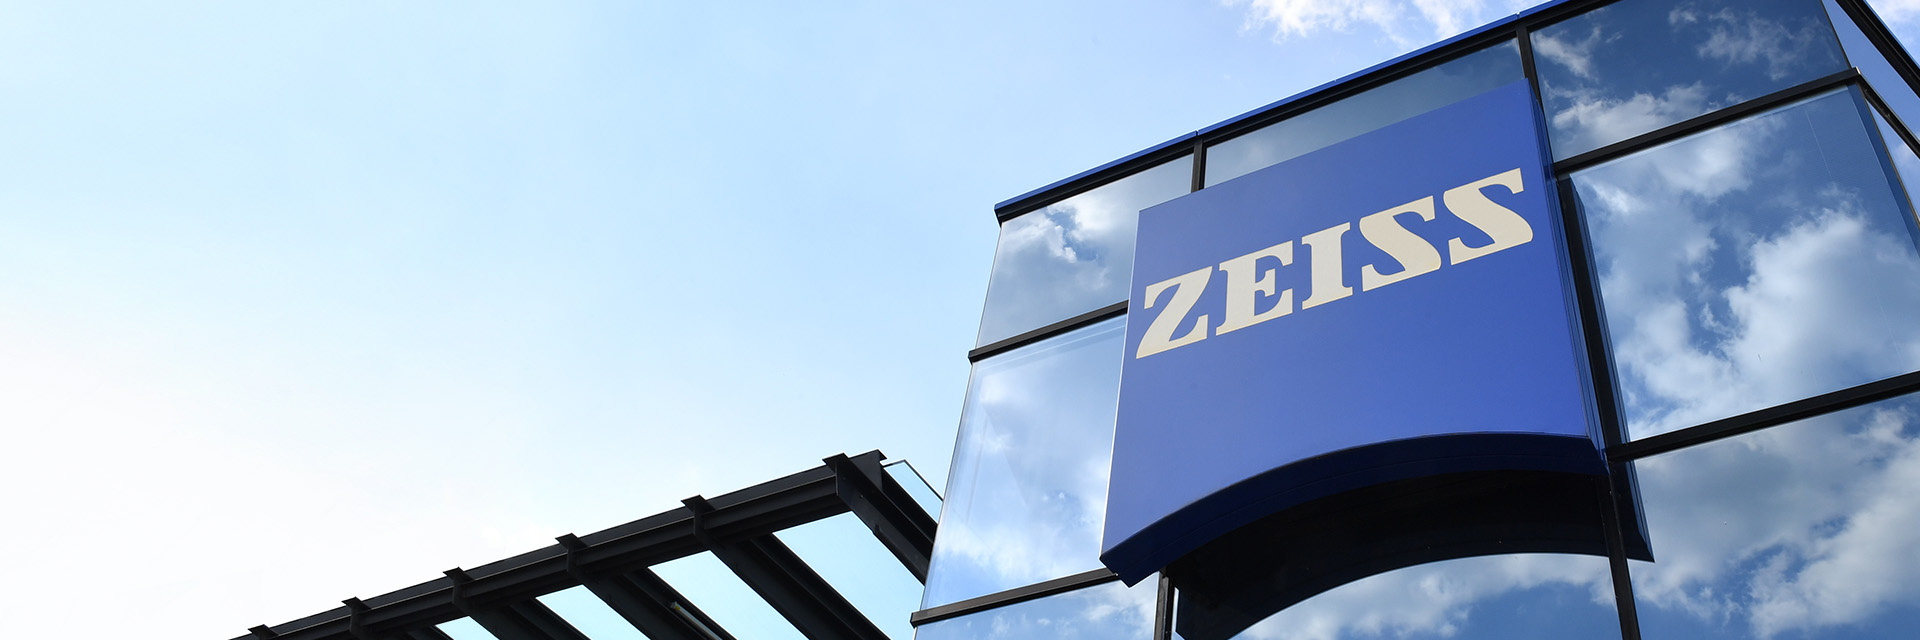 ZEISS Newsroom – News from the ZEISS Group